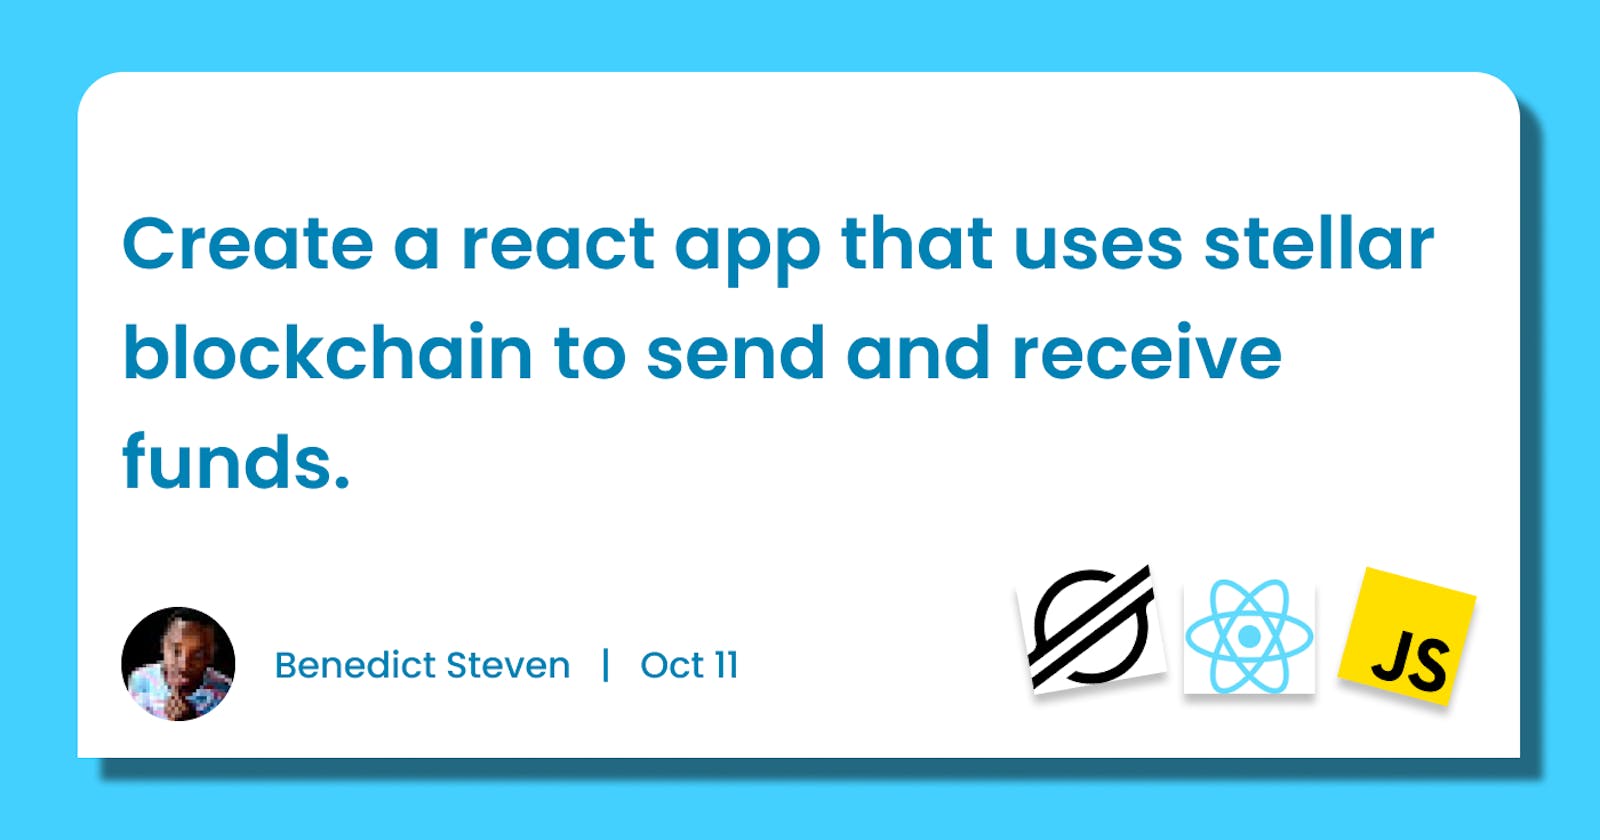 Create a react app that uses stellar blockchain to send and receive funds.